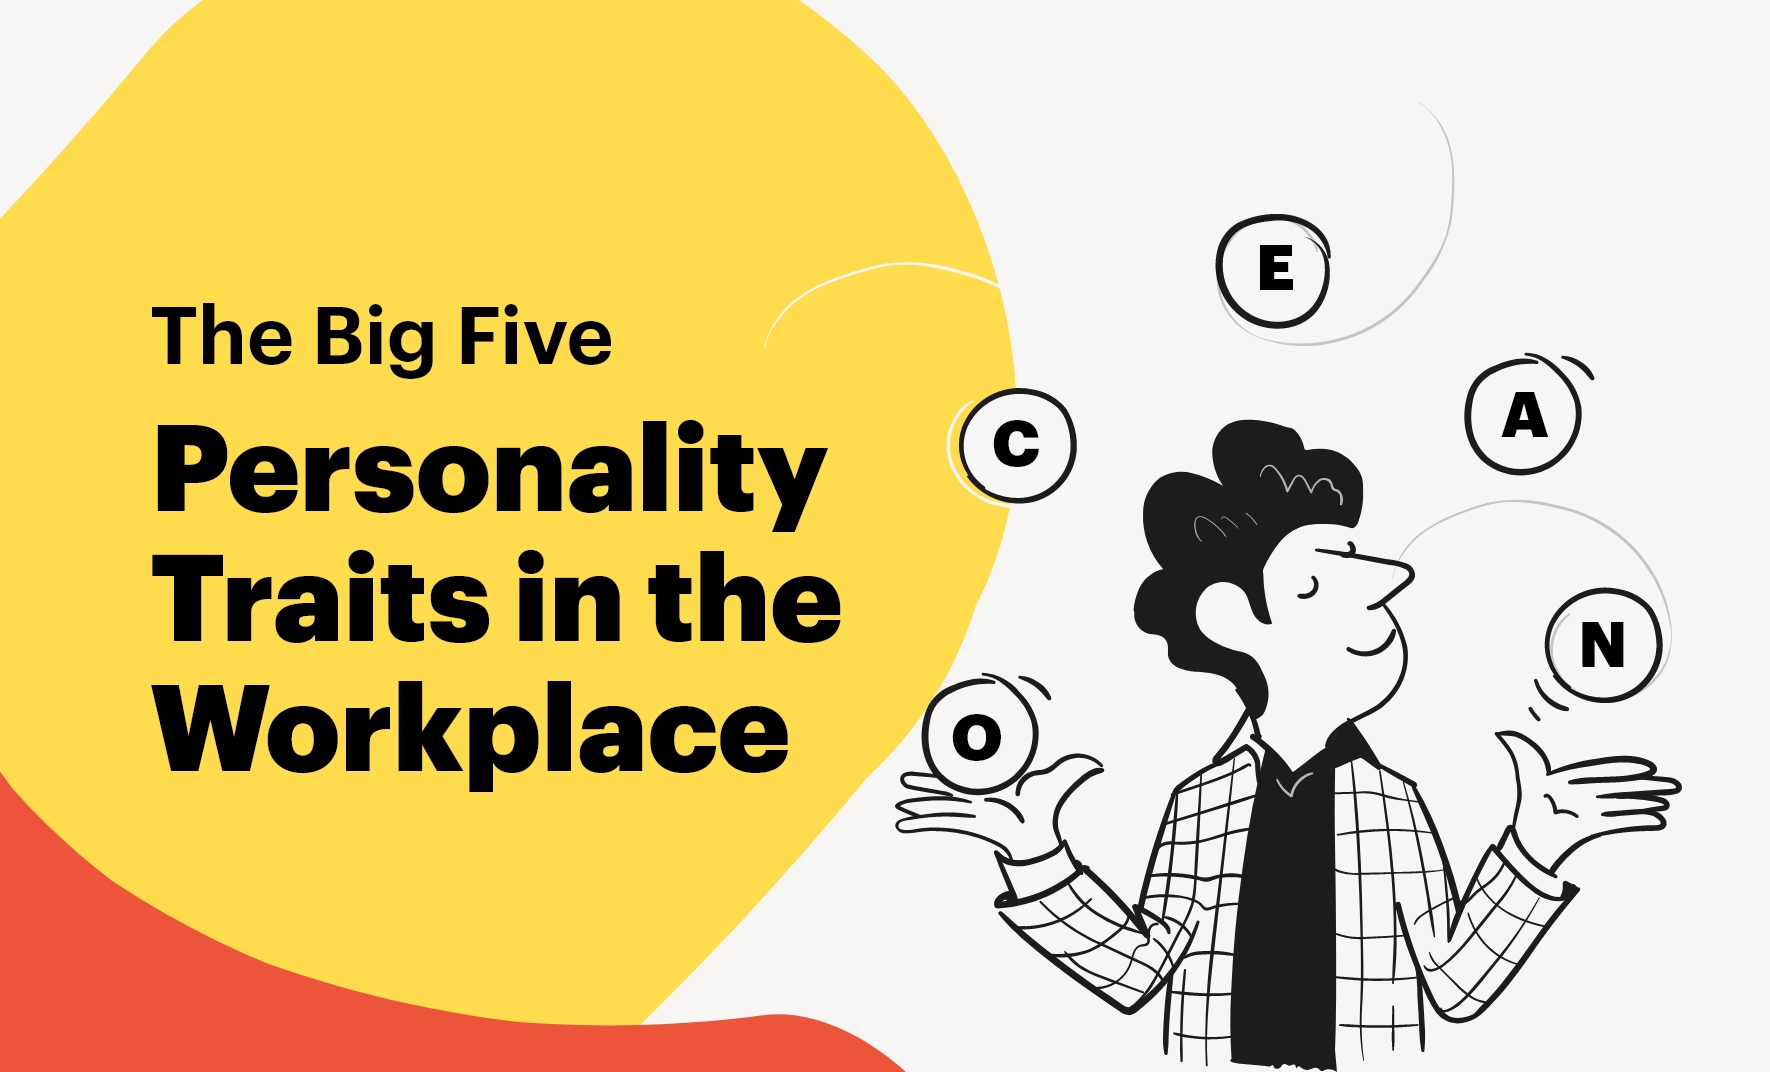 The Big Five Personality Traits in the Workplace